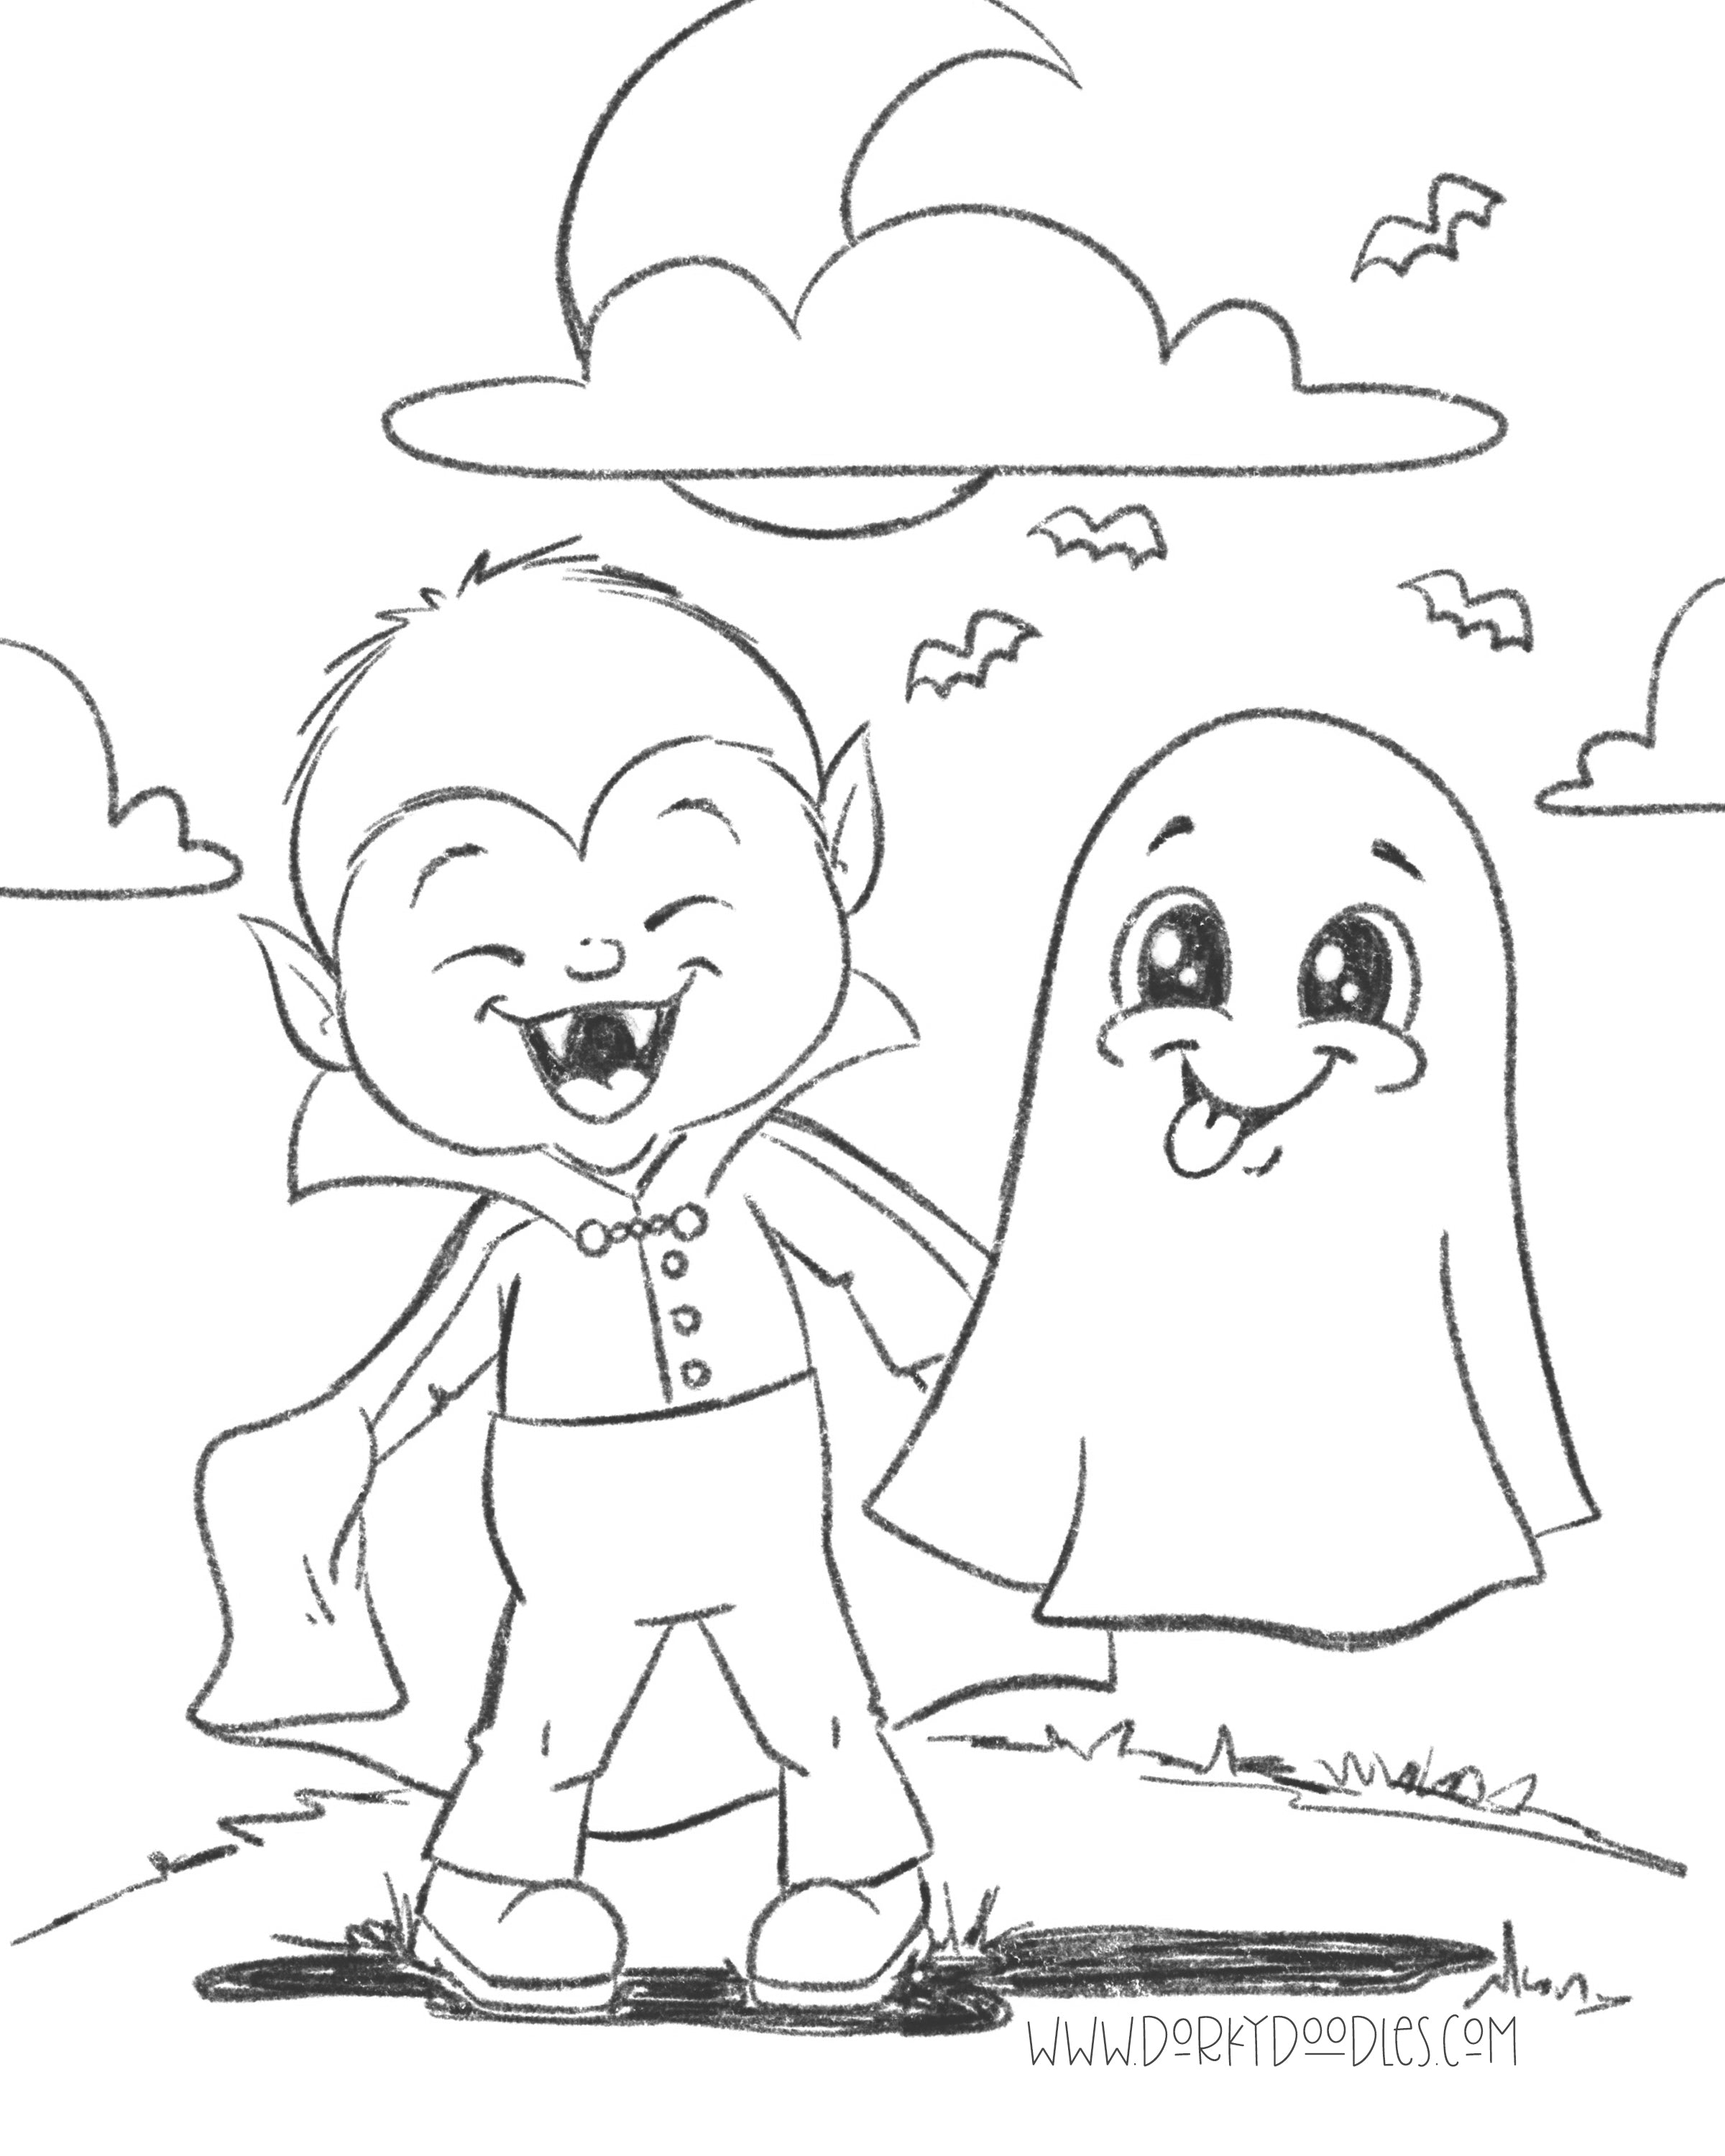 Fun Halloween Coloring Page – Dorky Doodles